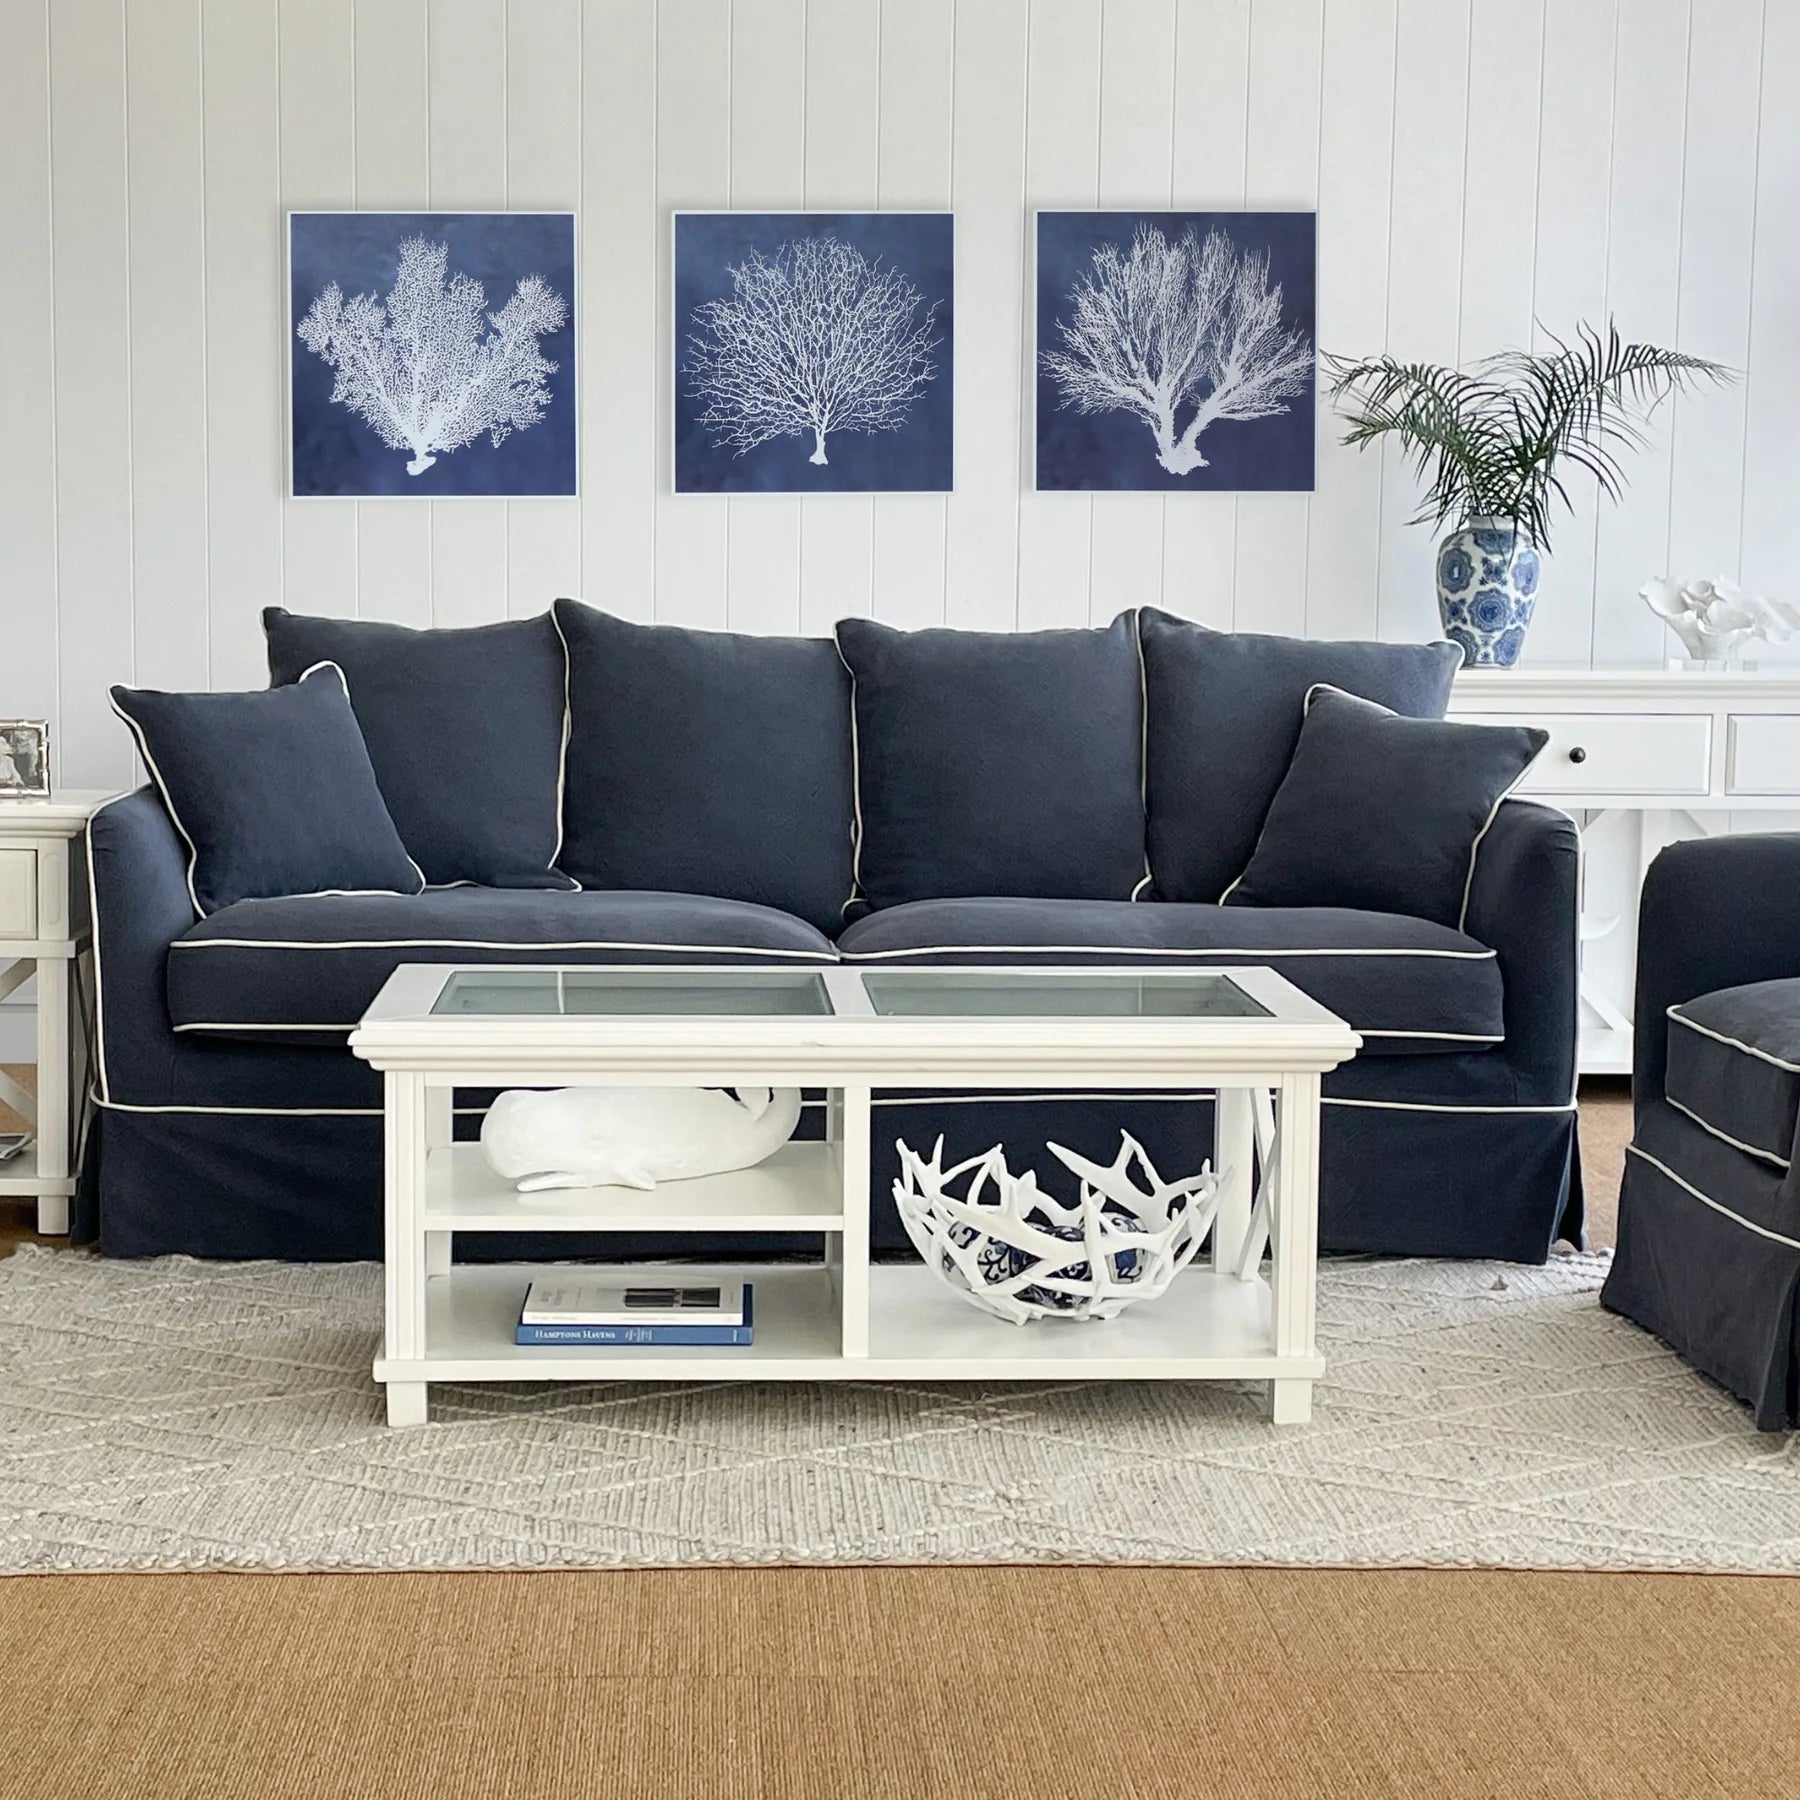 Noosa 3- Seater Sofa Navy With White Piping Linen Blend